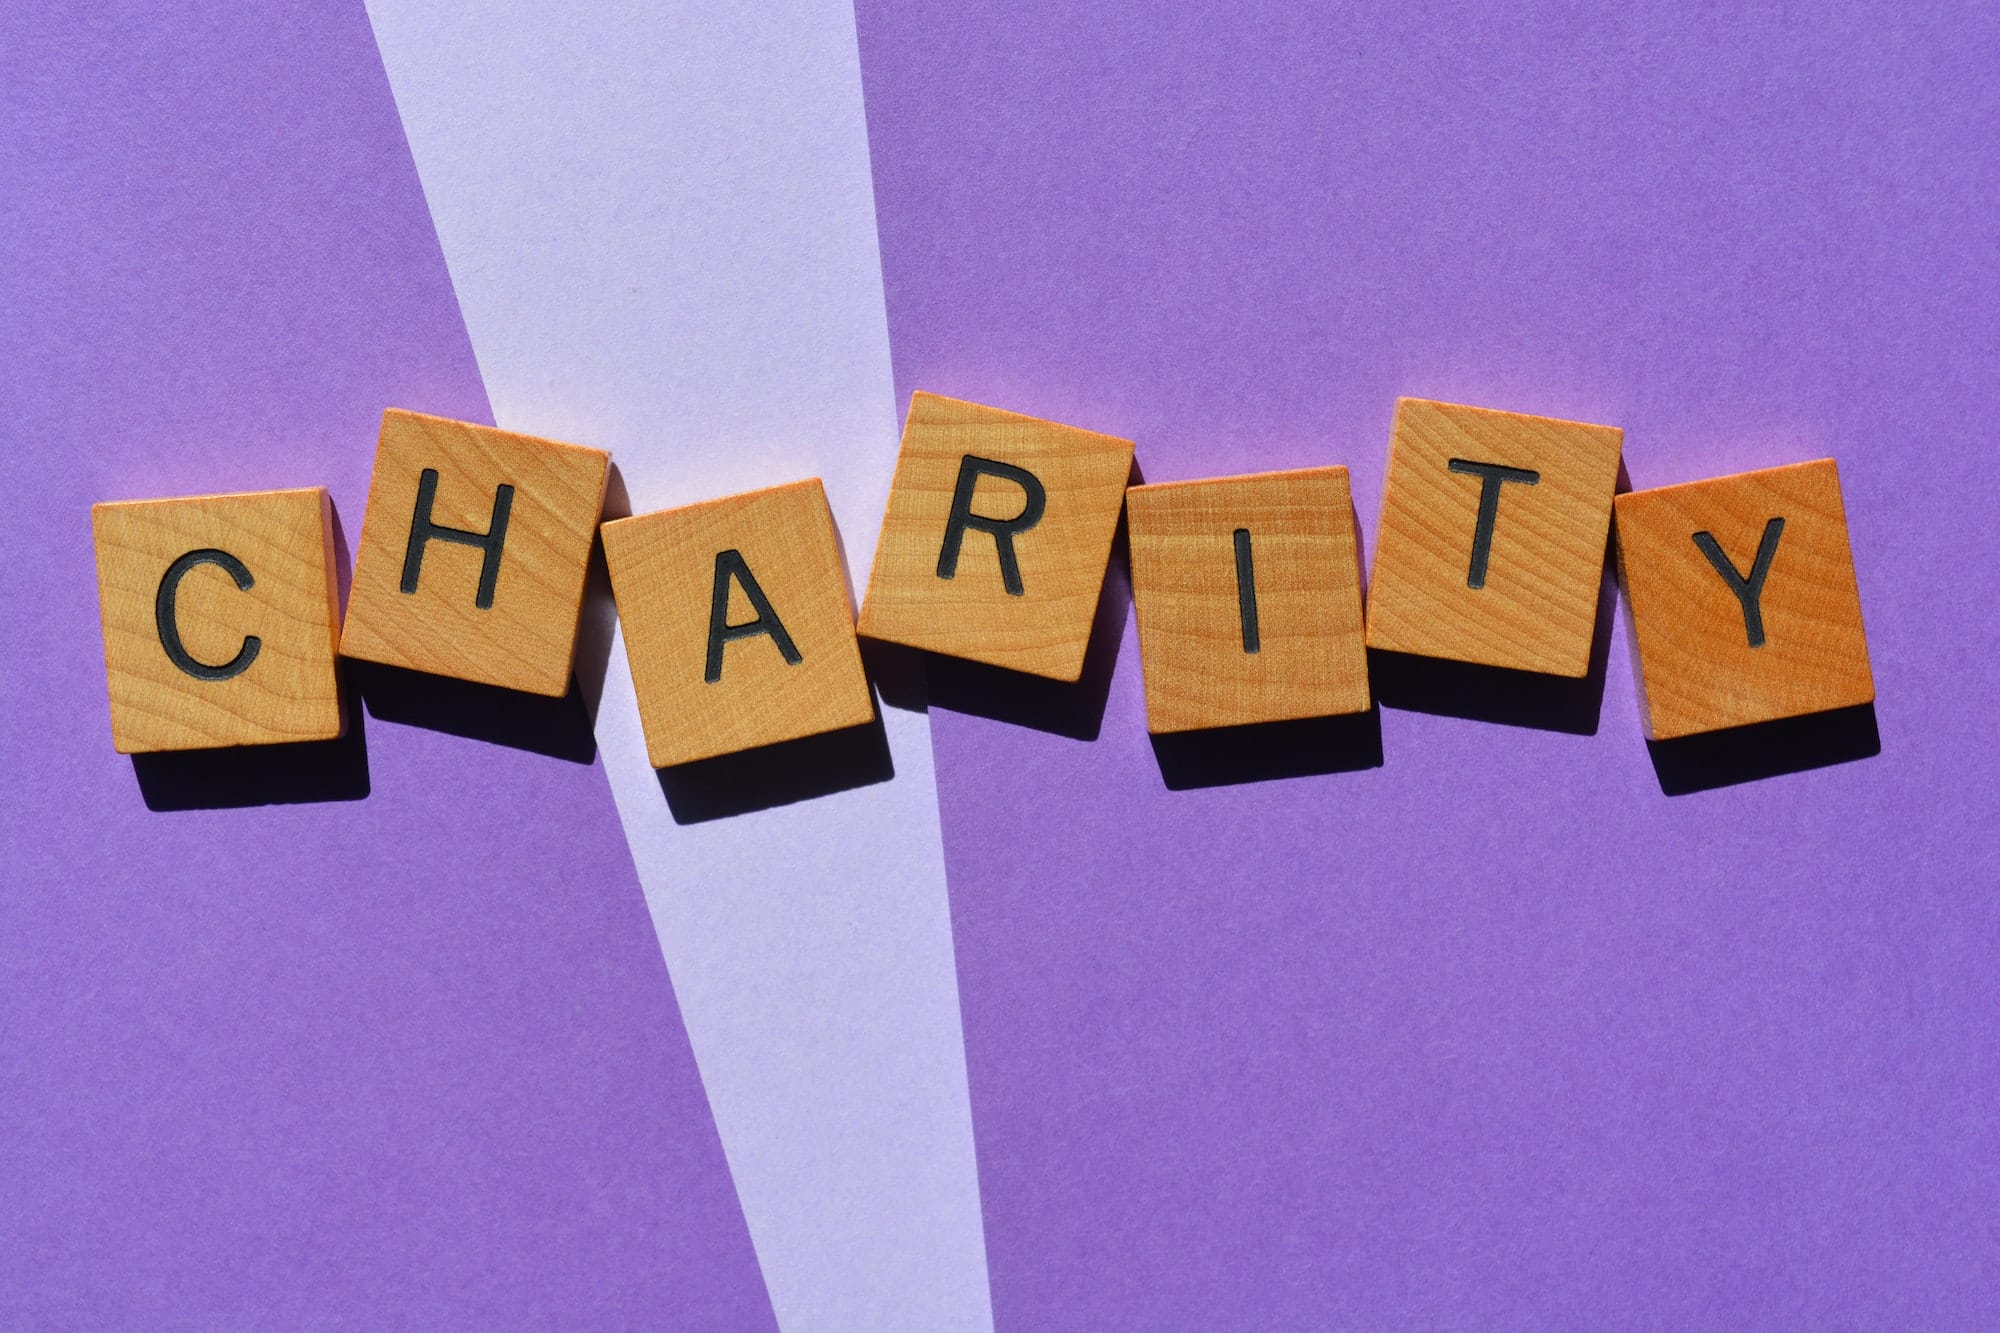 Donations and Charity. Donation Concept. A Donation Box on the White Background.